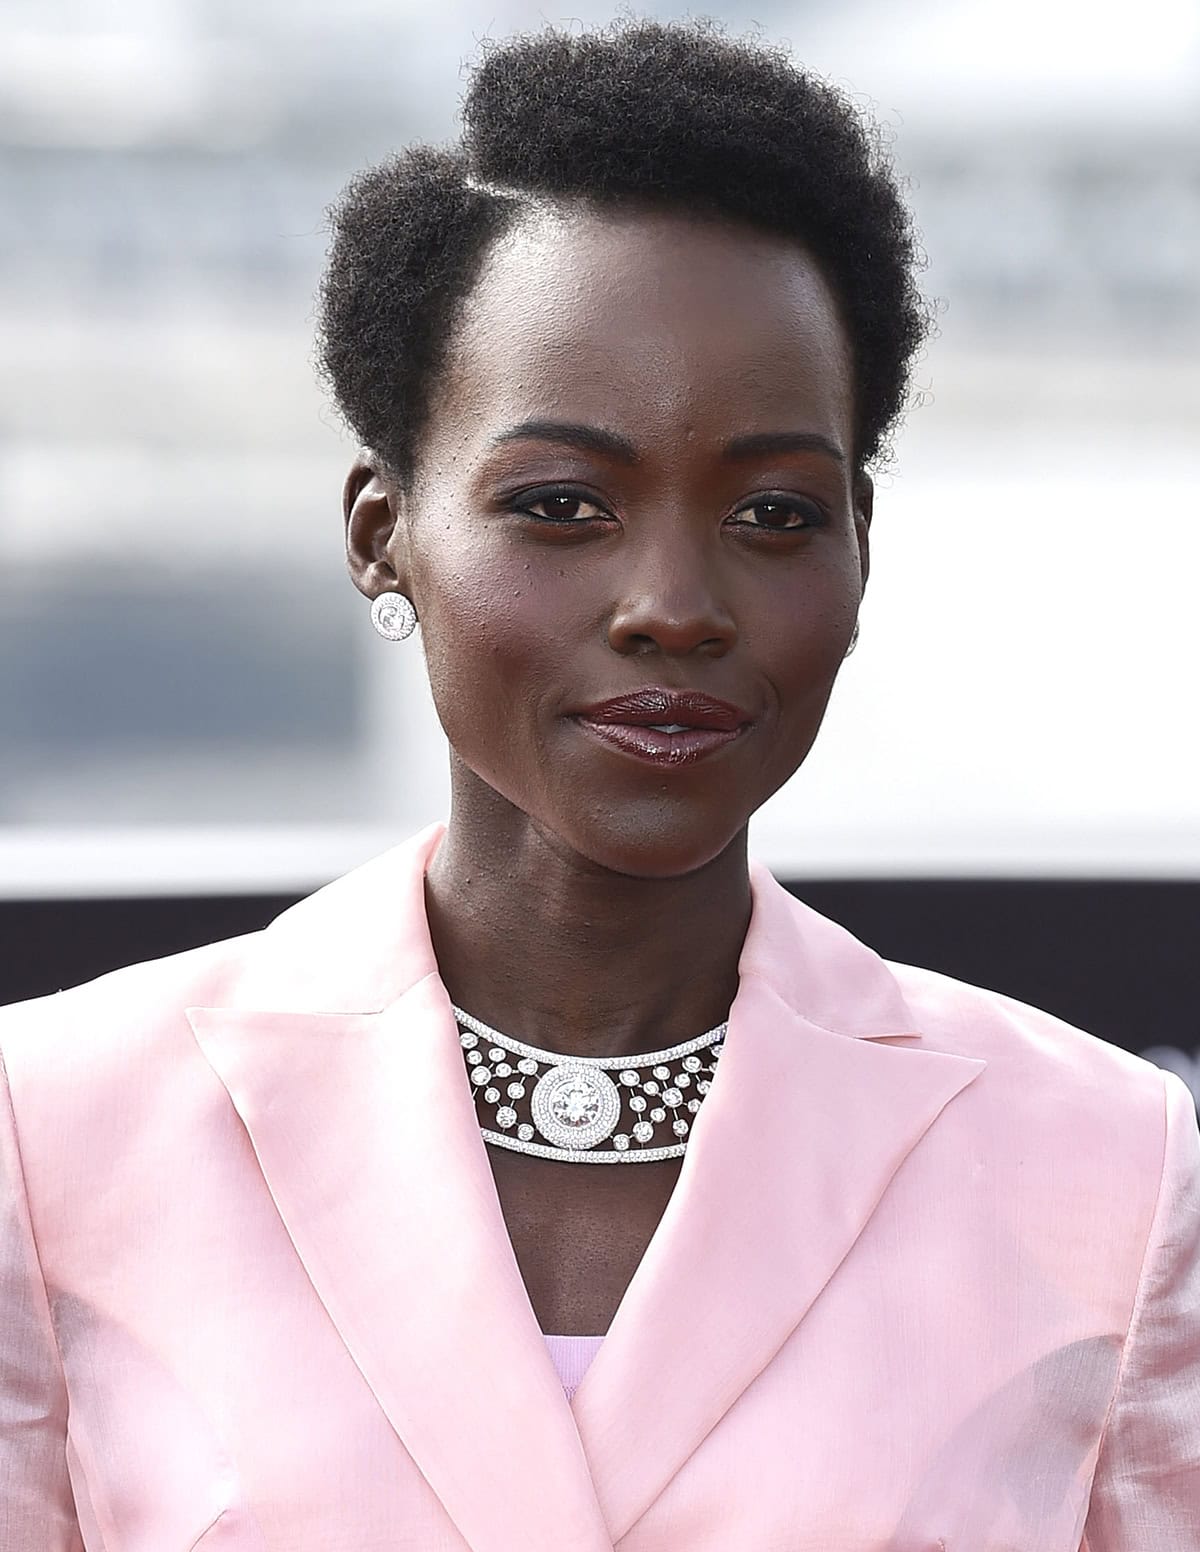 Lupita Nyong'o dazzles as she accessorizes her pink suit with De Beers Atomique Clip Earrings and Collar Necklace, inspired by the flawless symmetry of a diamond's internal molecular structure